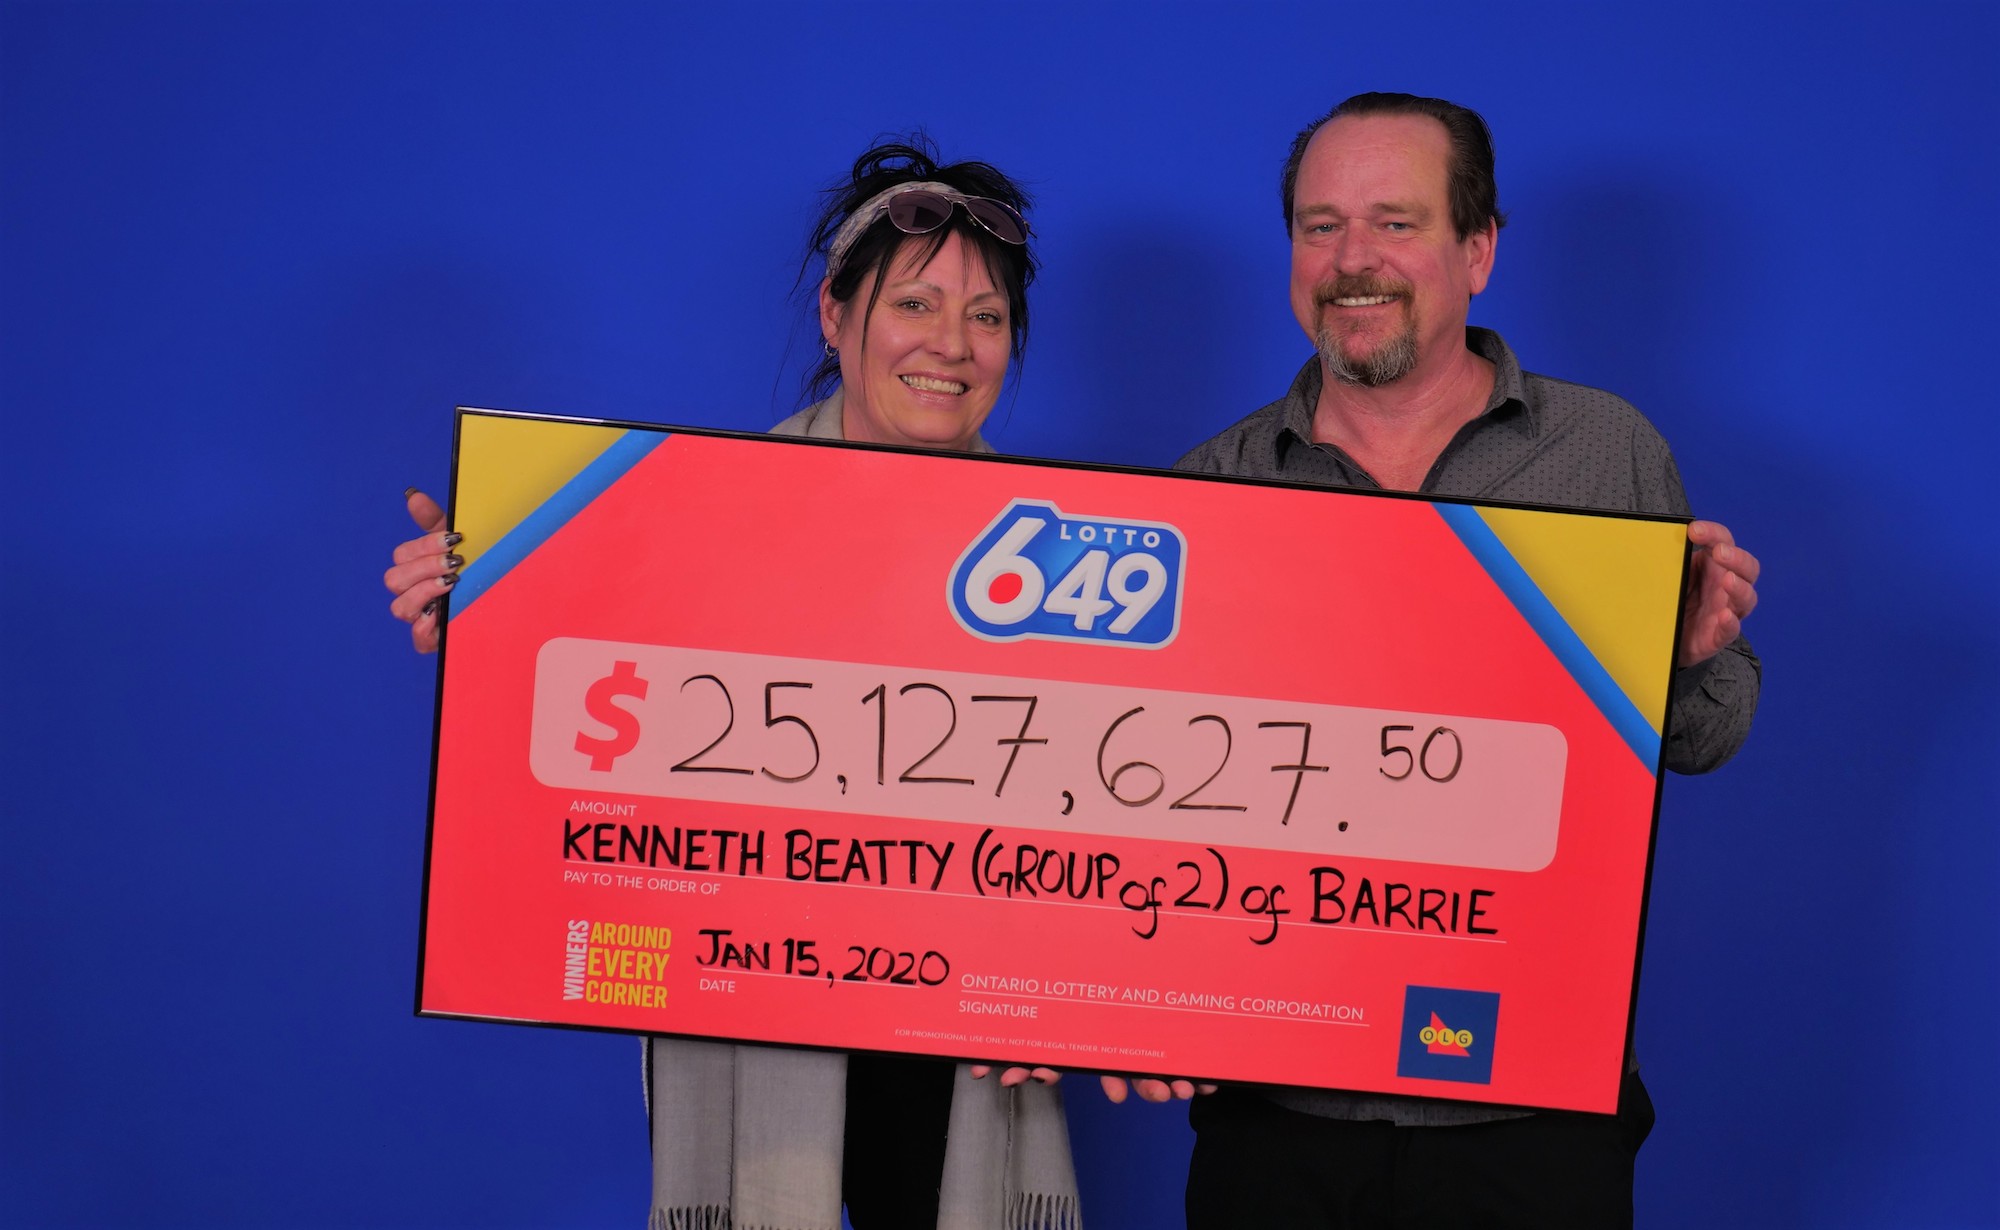 lotto 649 winning numbers may 25